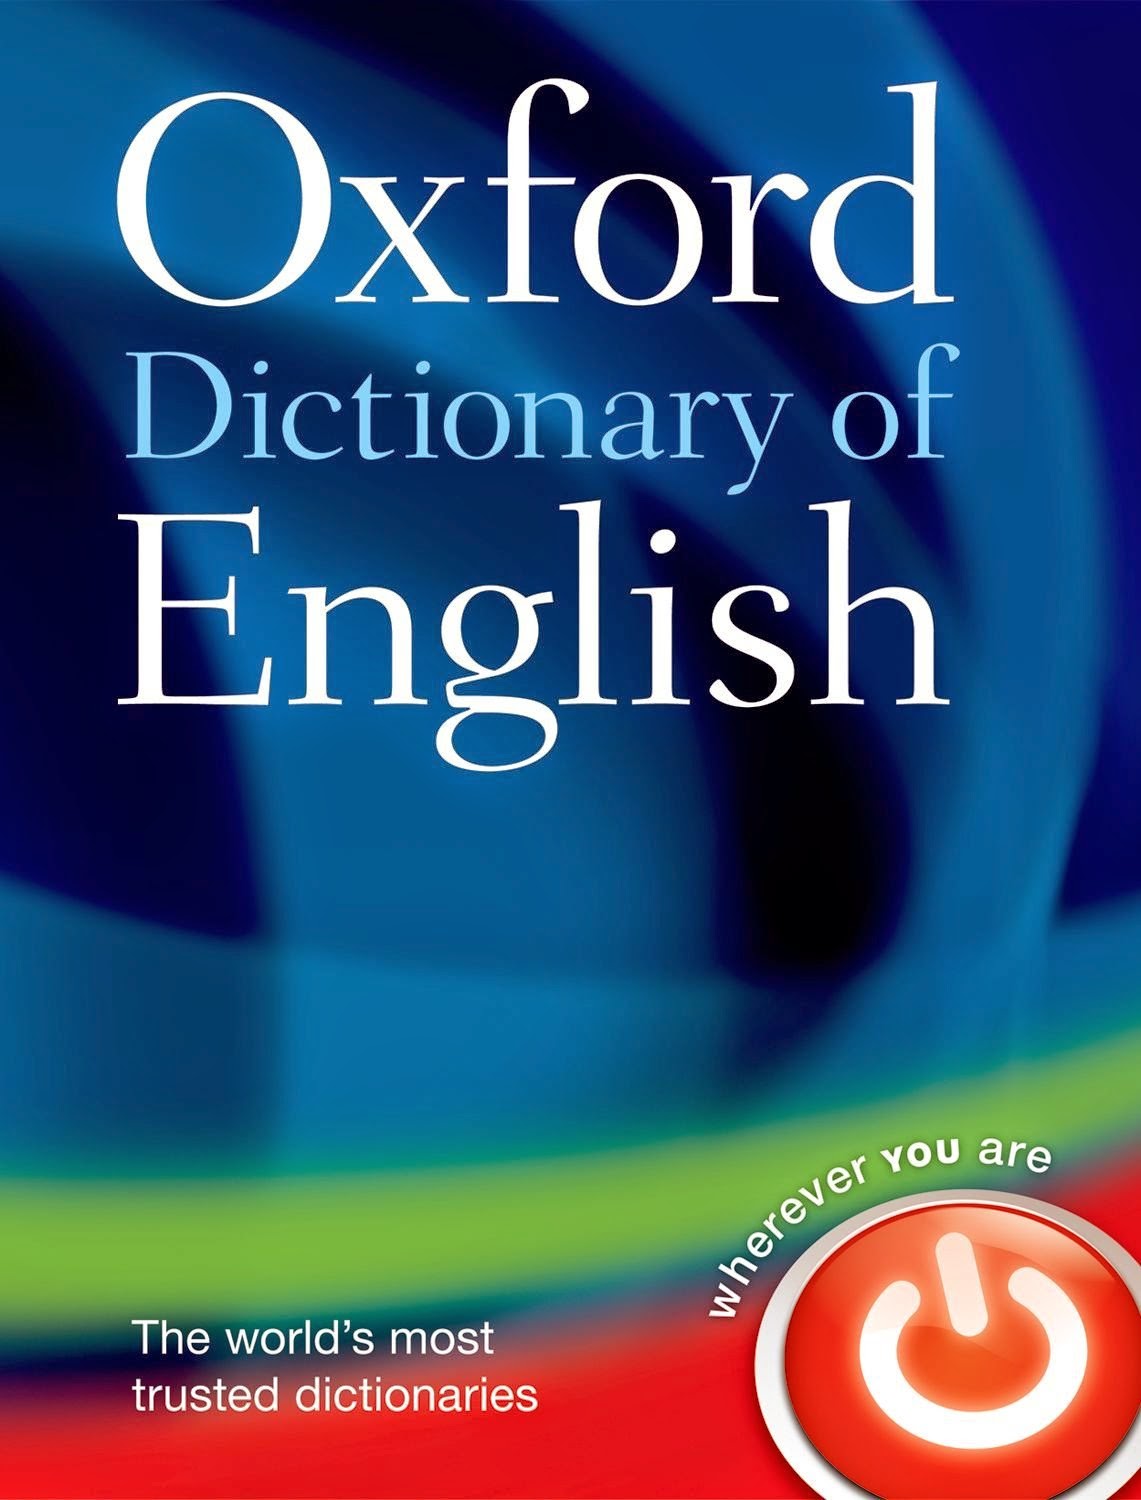 Oxford Dictionary For Android 2.2 Free Download